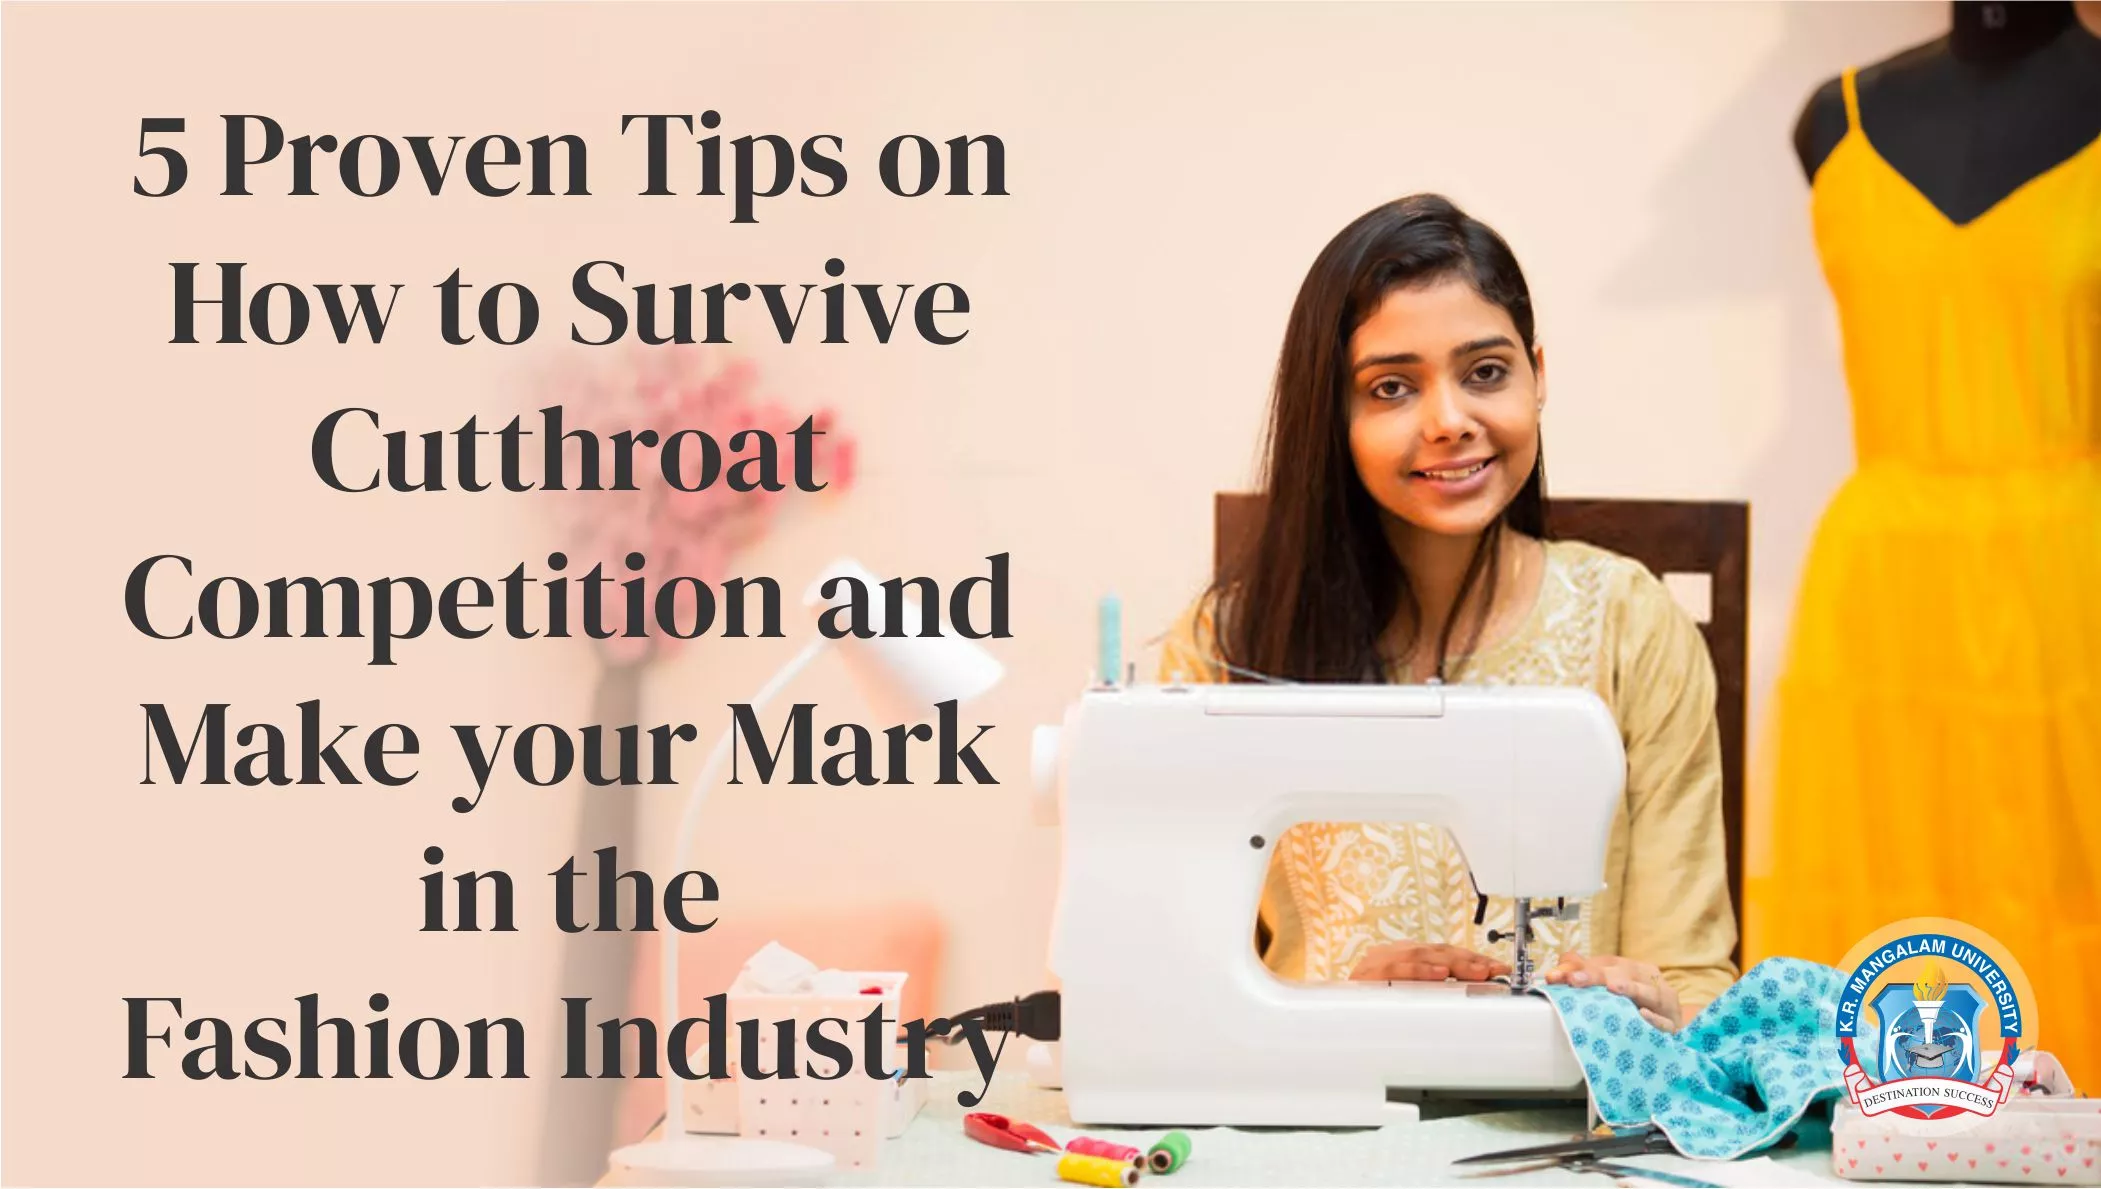 5 Proven Tips on How to Survive Cutthroat Competition and Make your Mark in the Fashion Industry